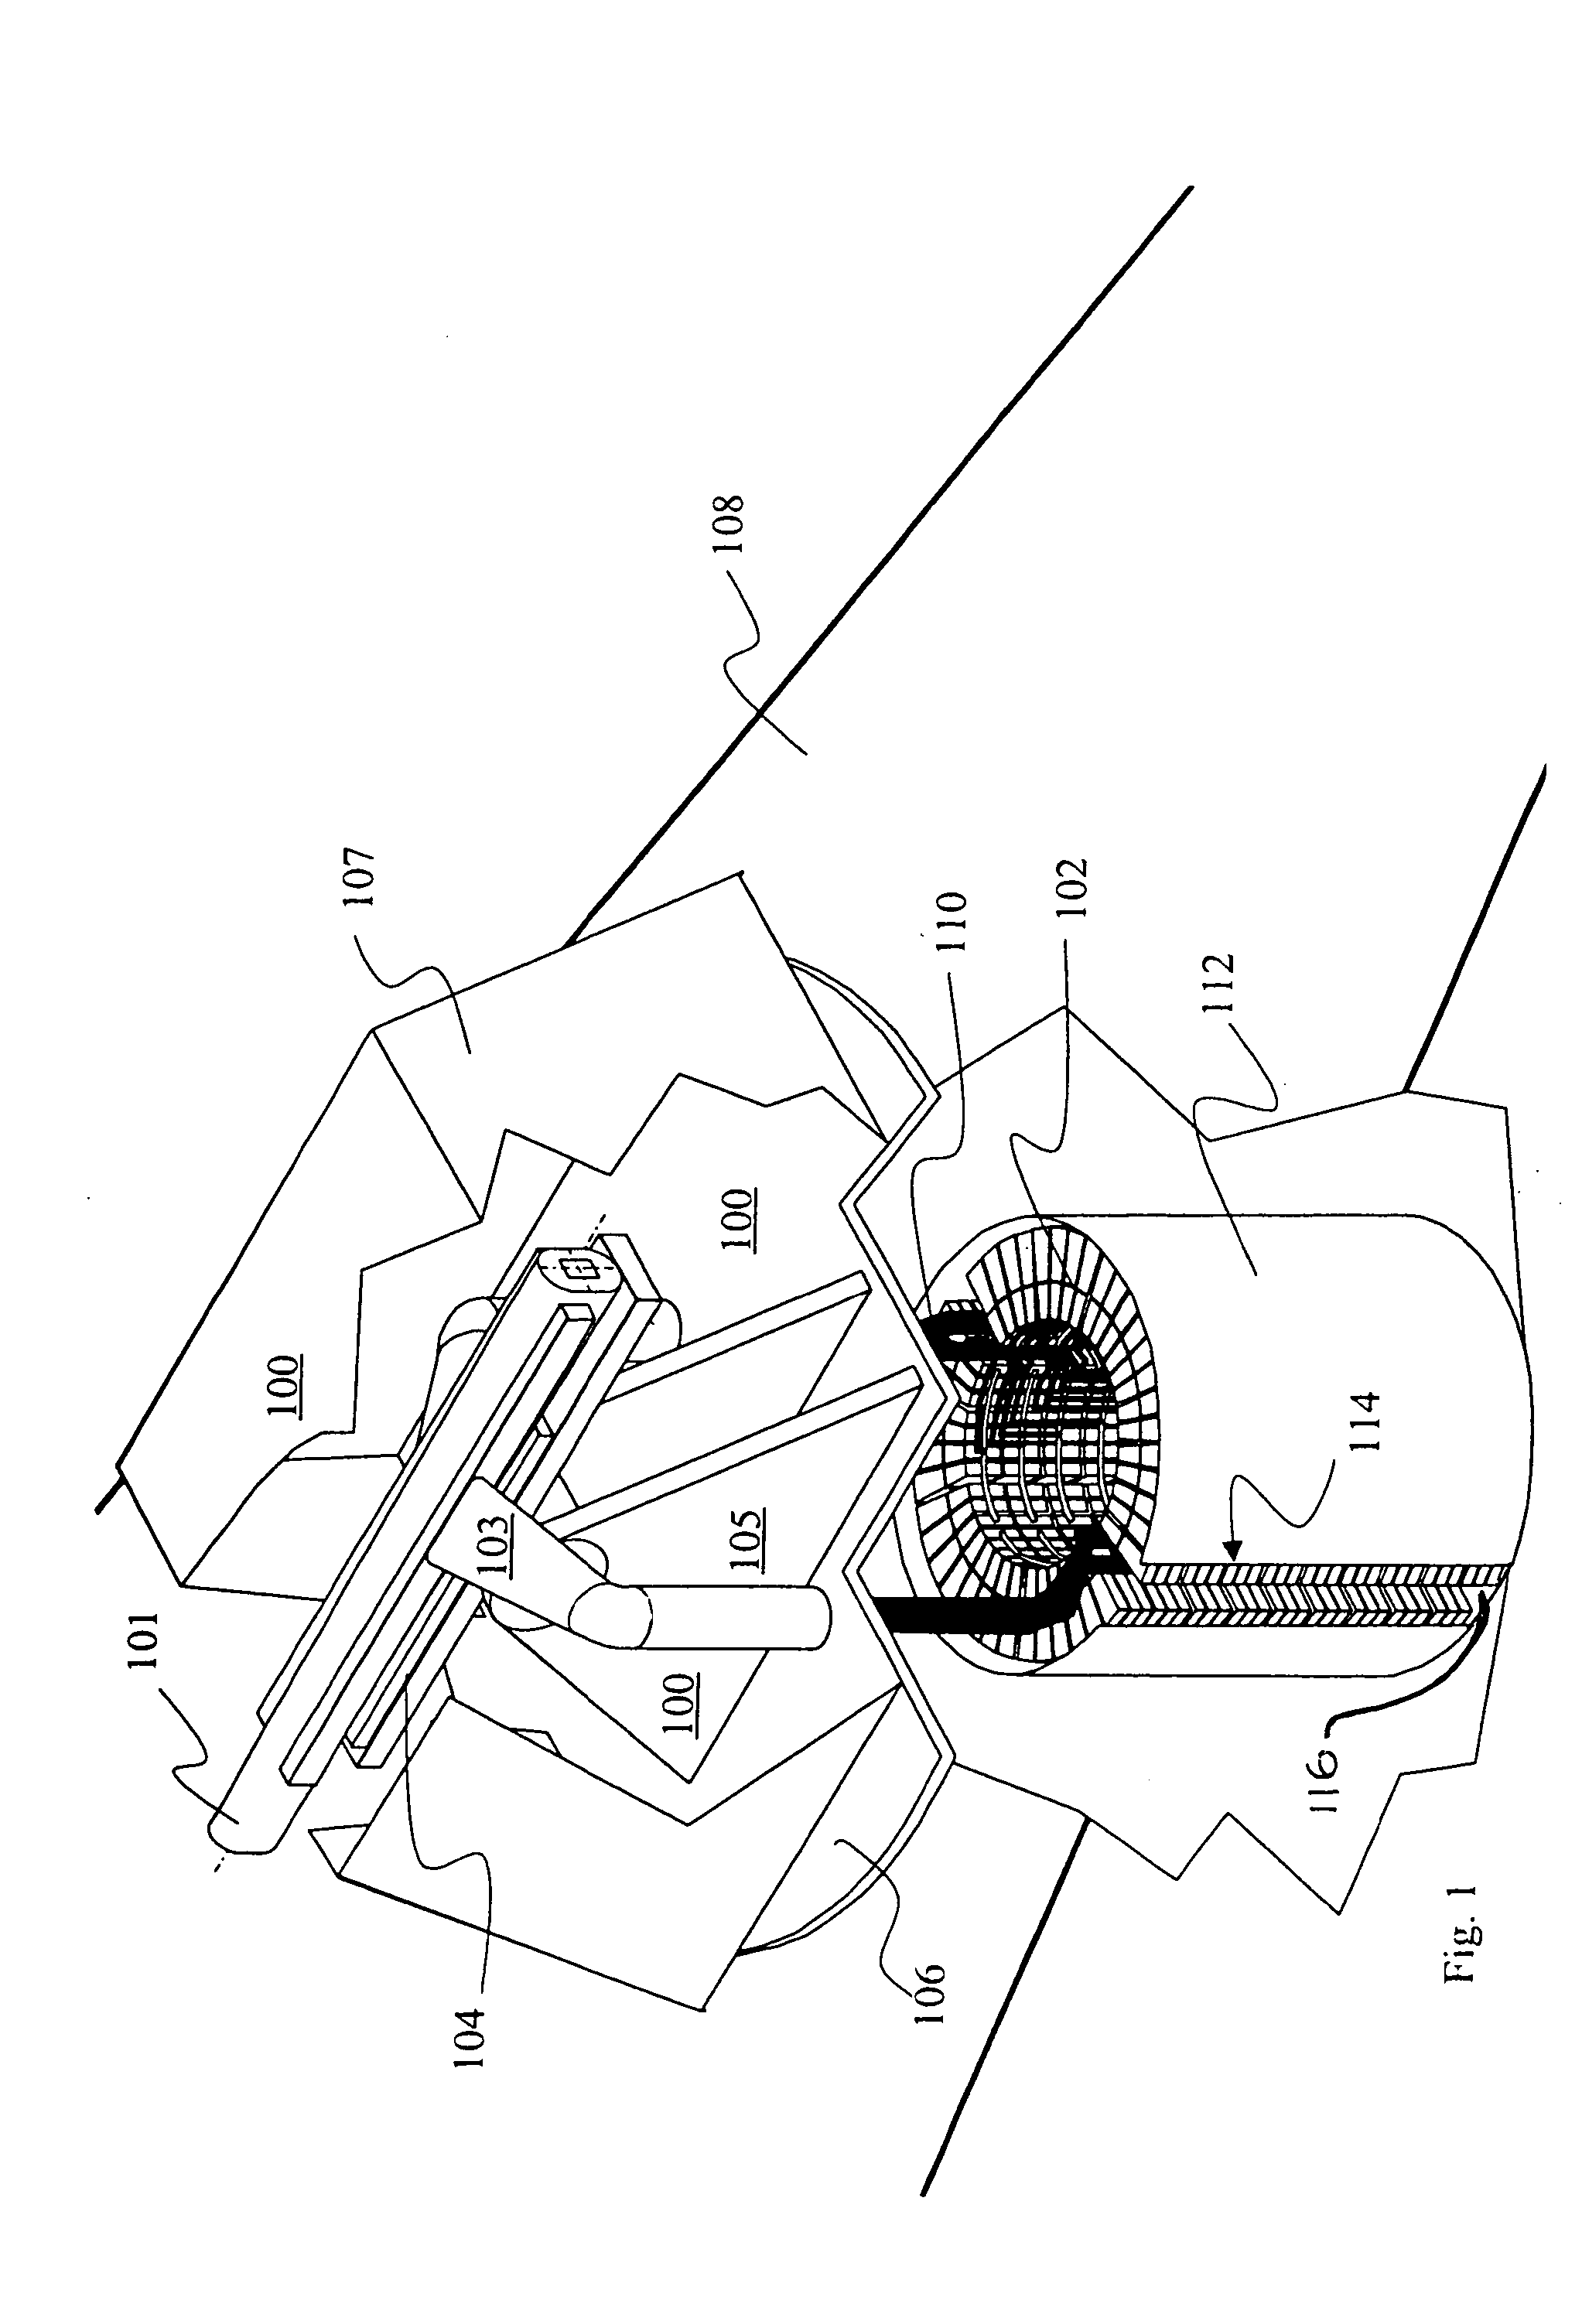 Rotating pulse forming network for shipboard operation of electromagnetic gun and capacitor module